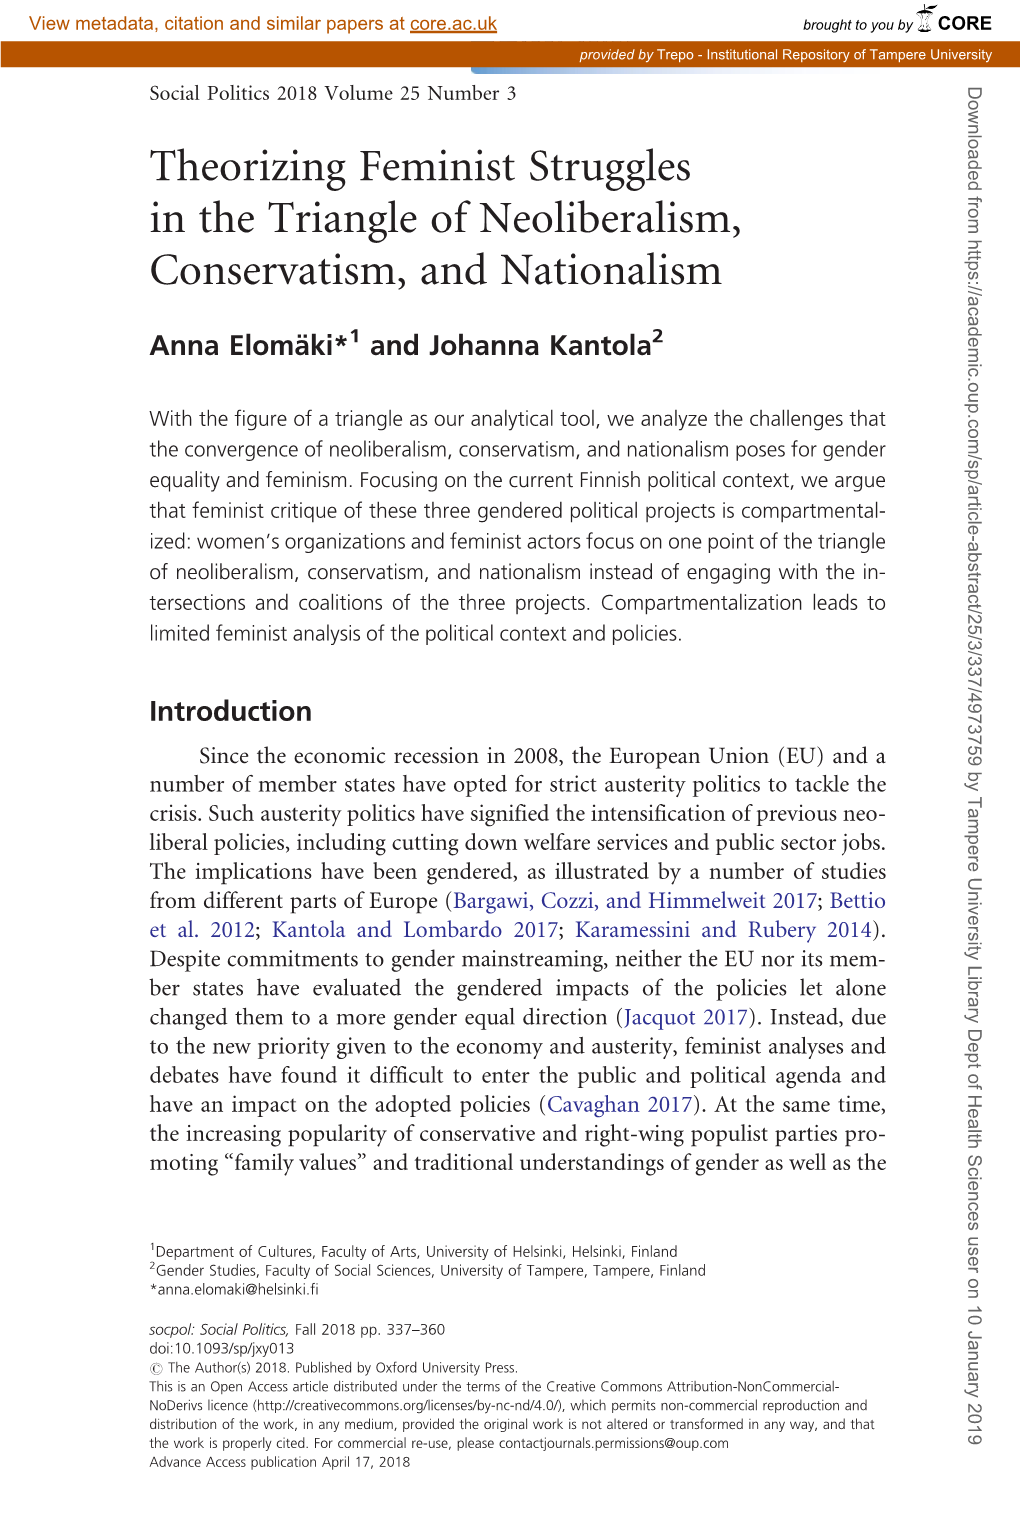 Theorizing Feminist Struggles in the Triangle of Neoliberalism, Conservatism, and Nationalism